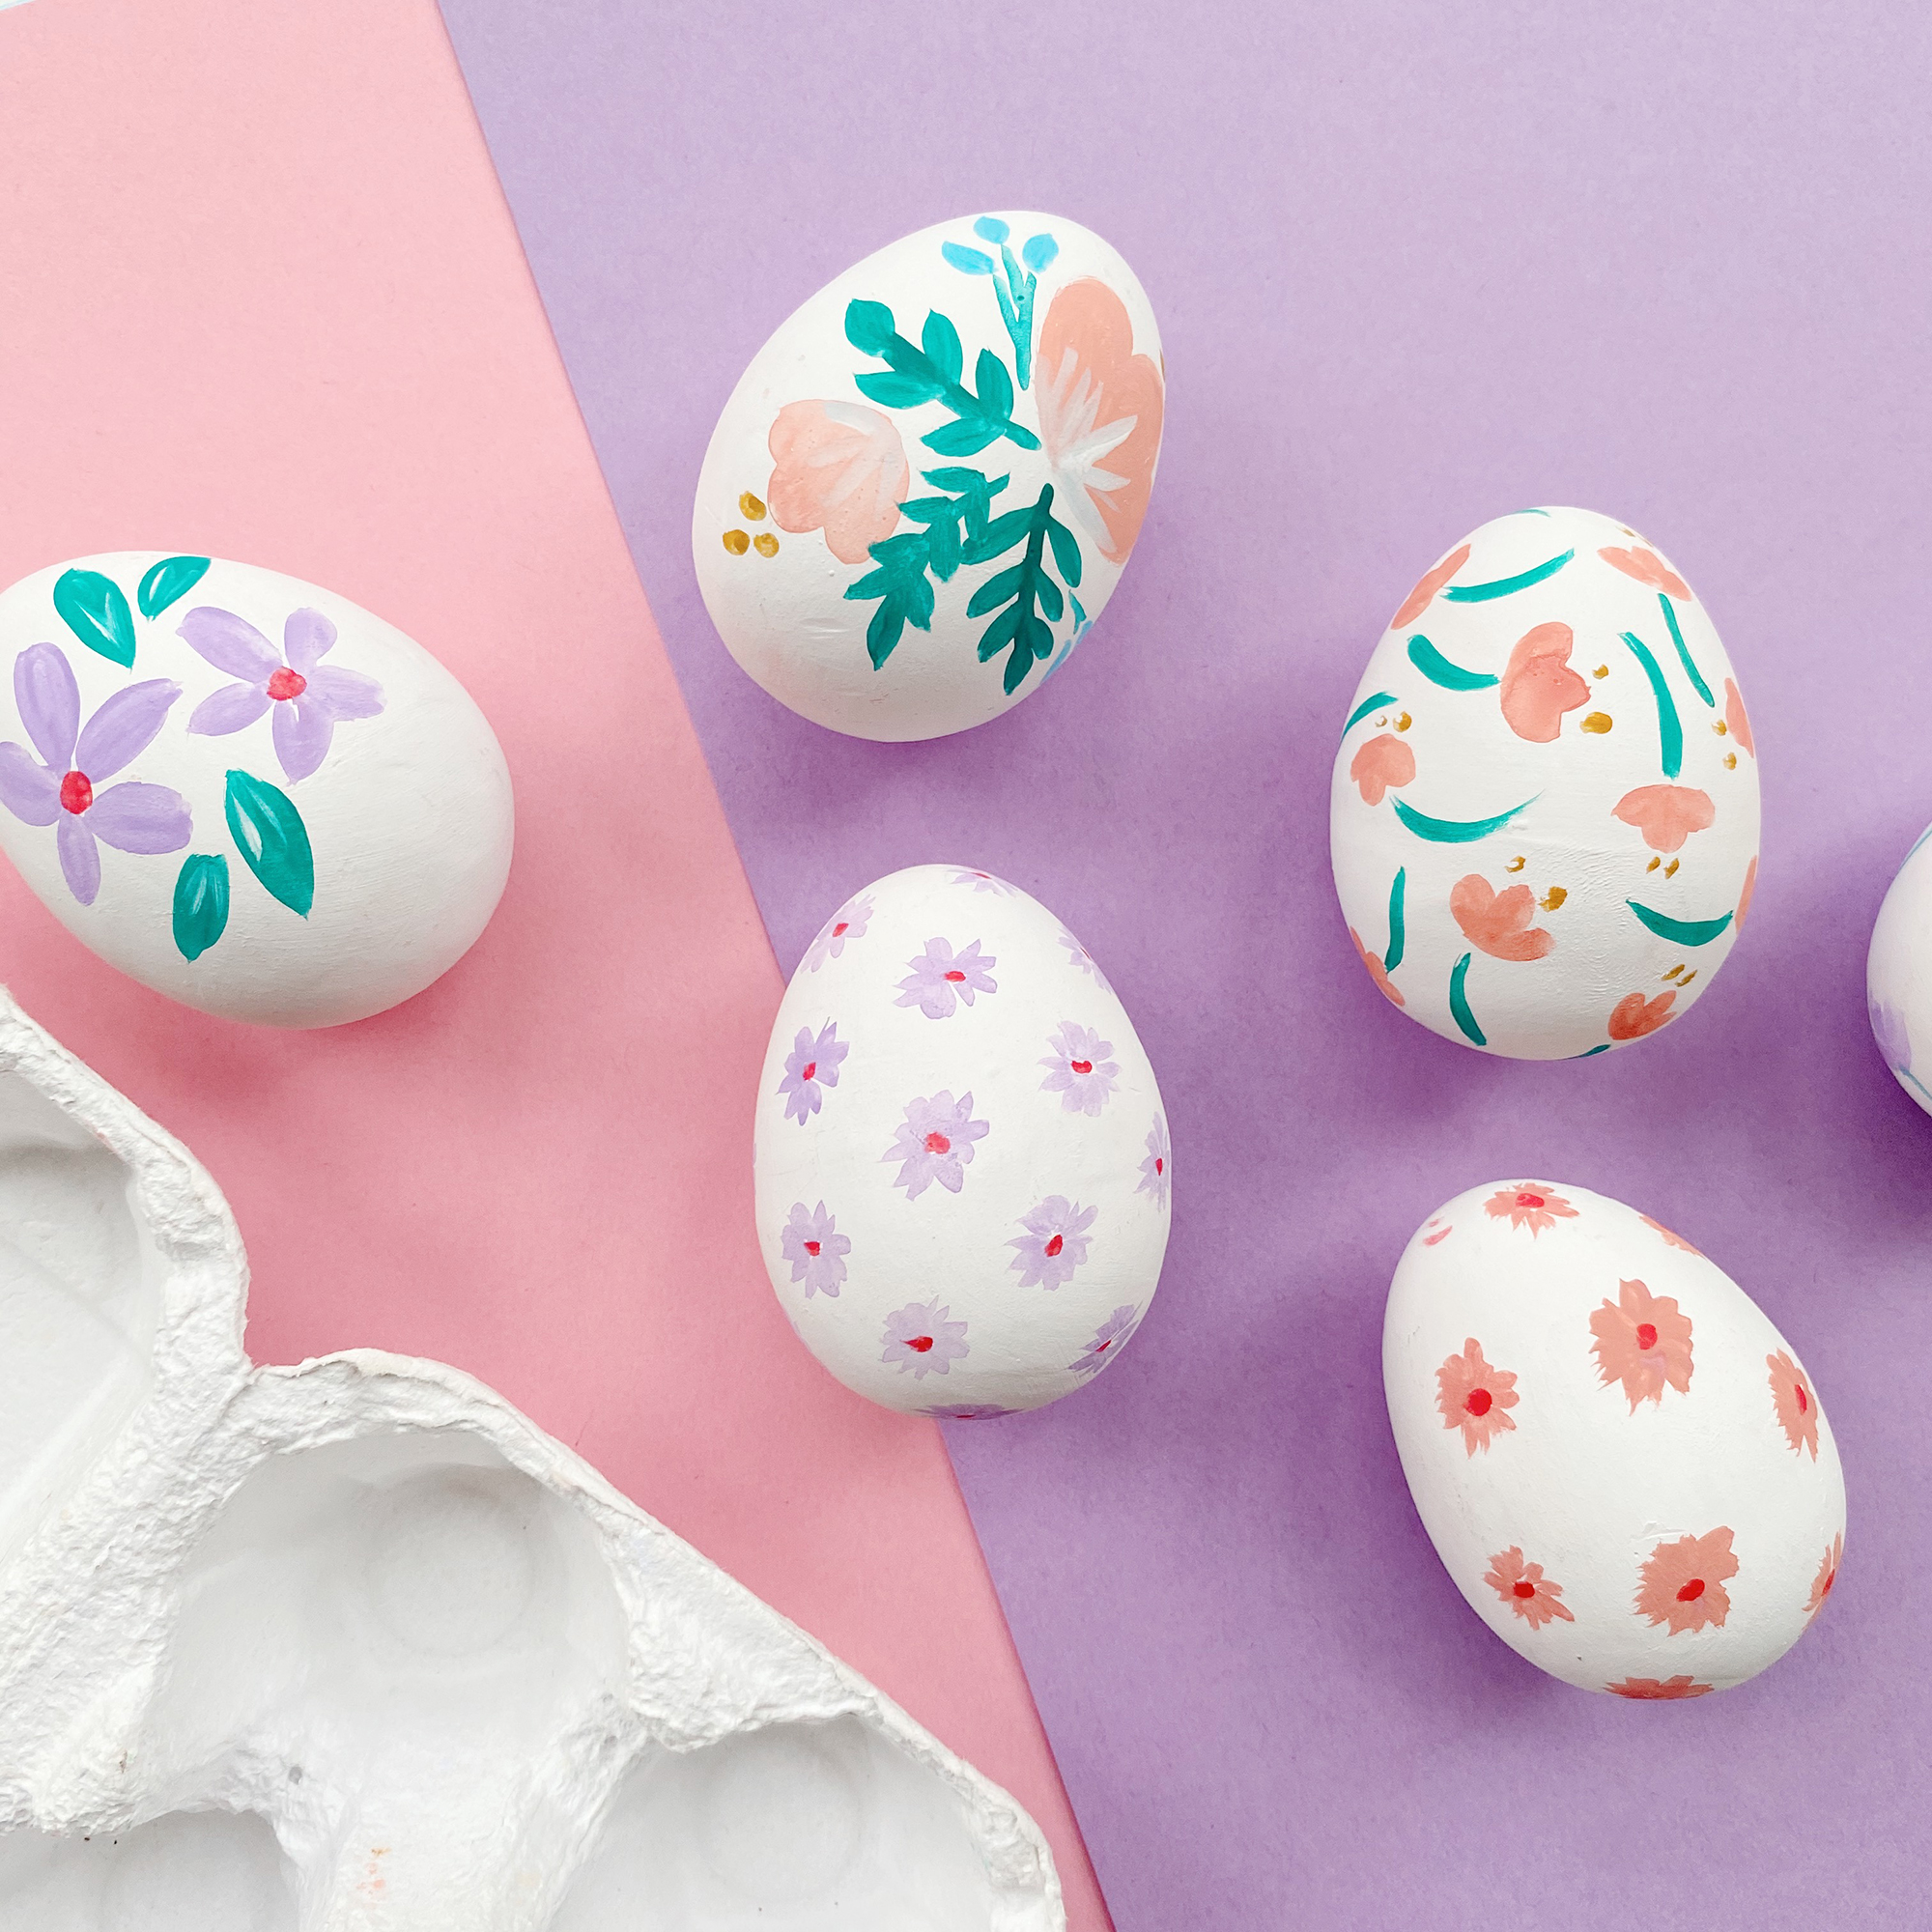 How to Make Floral Painted Eggs | Hobbycraft